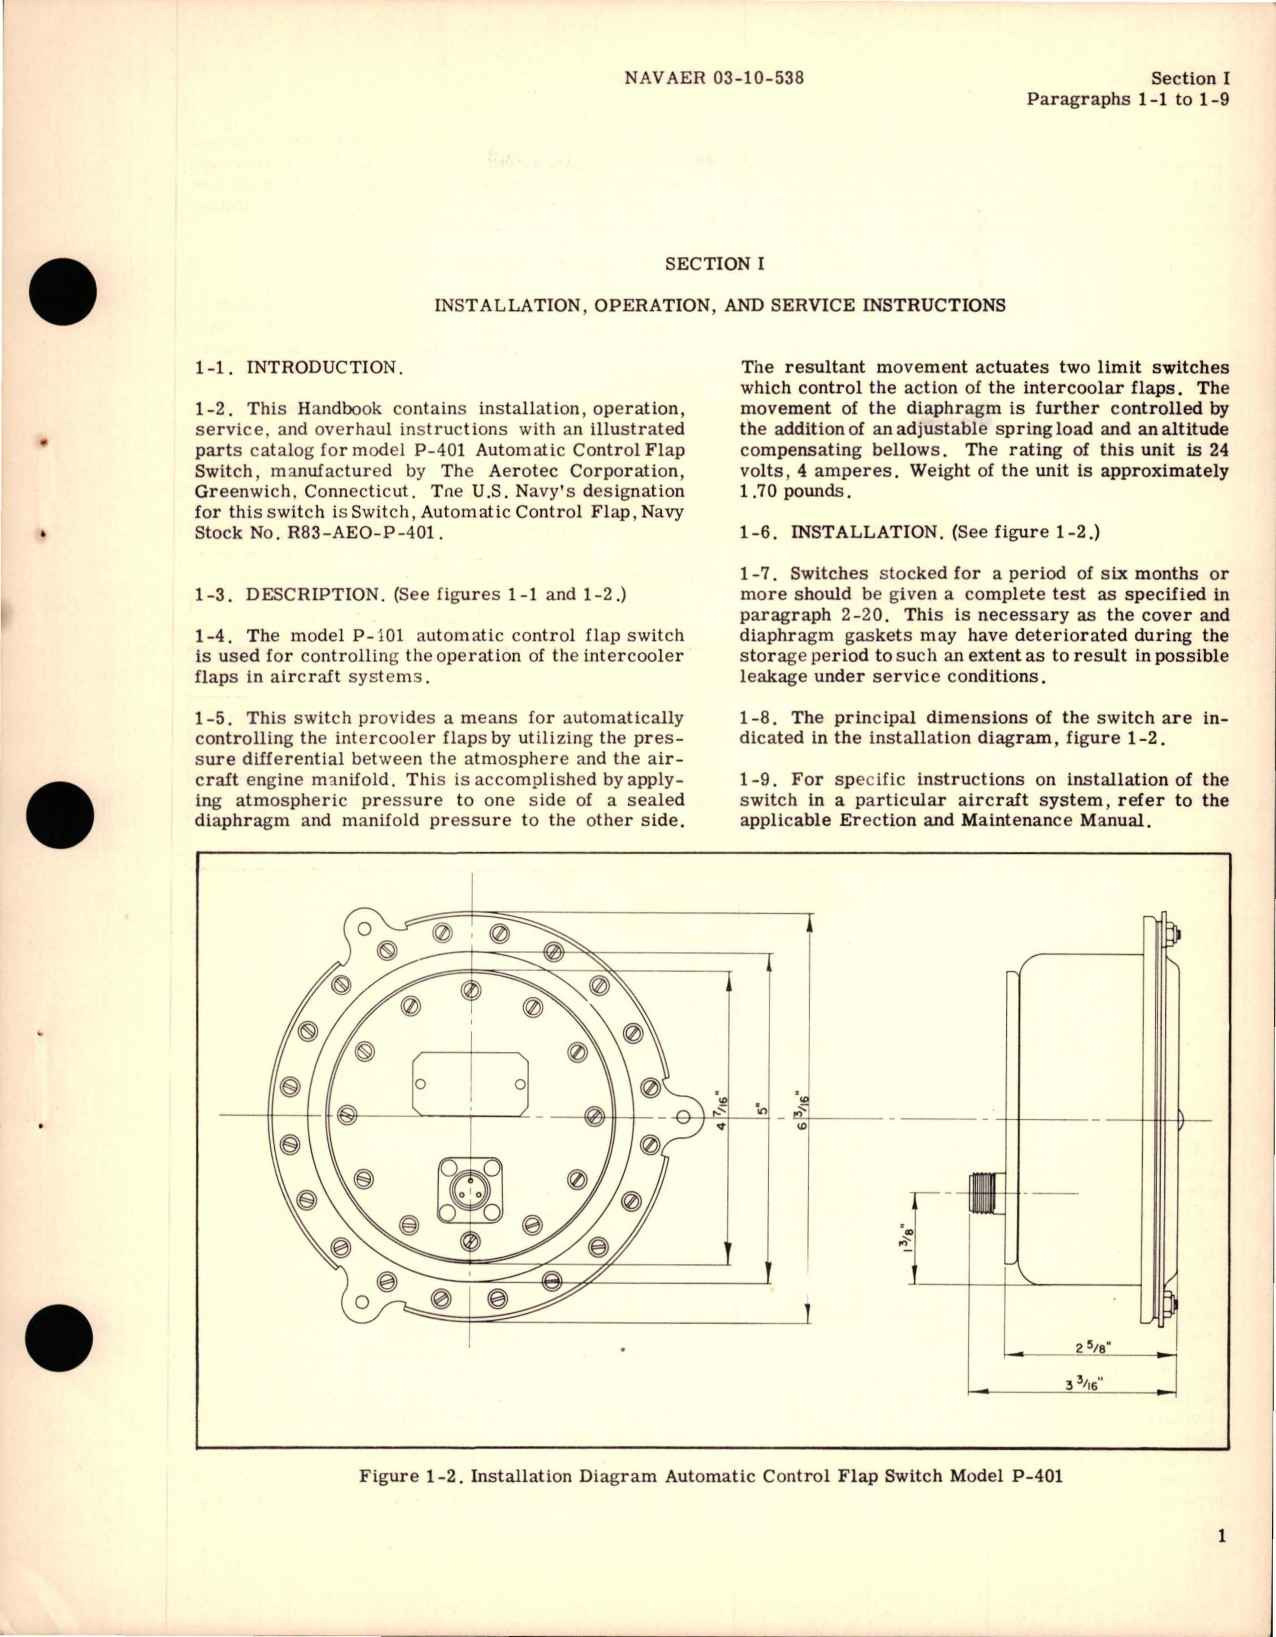 Sample page 5 from AirCorps Library document: Operation, Service and Overhaul Instructions with Parts Catalog for Automatic Control Flap Switch - Model P-401